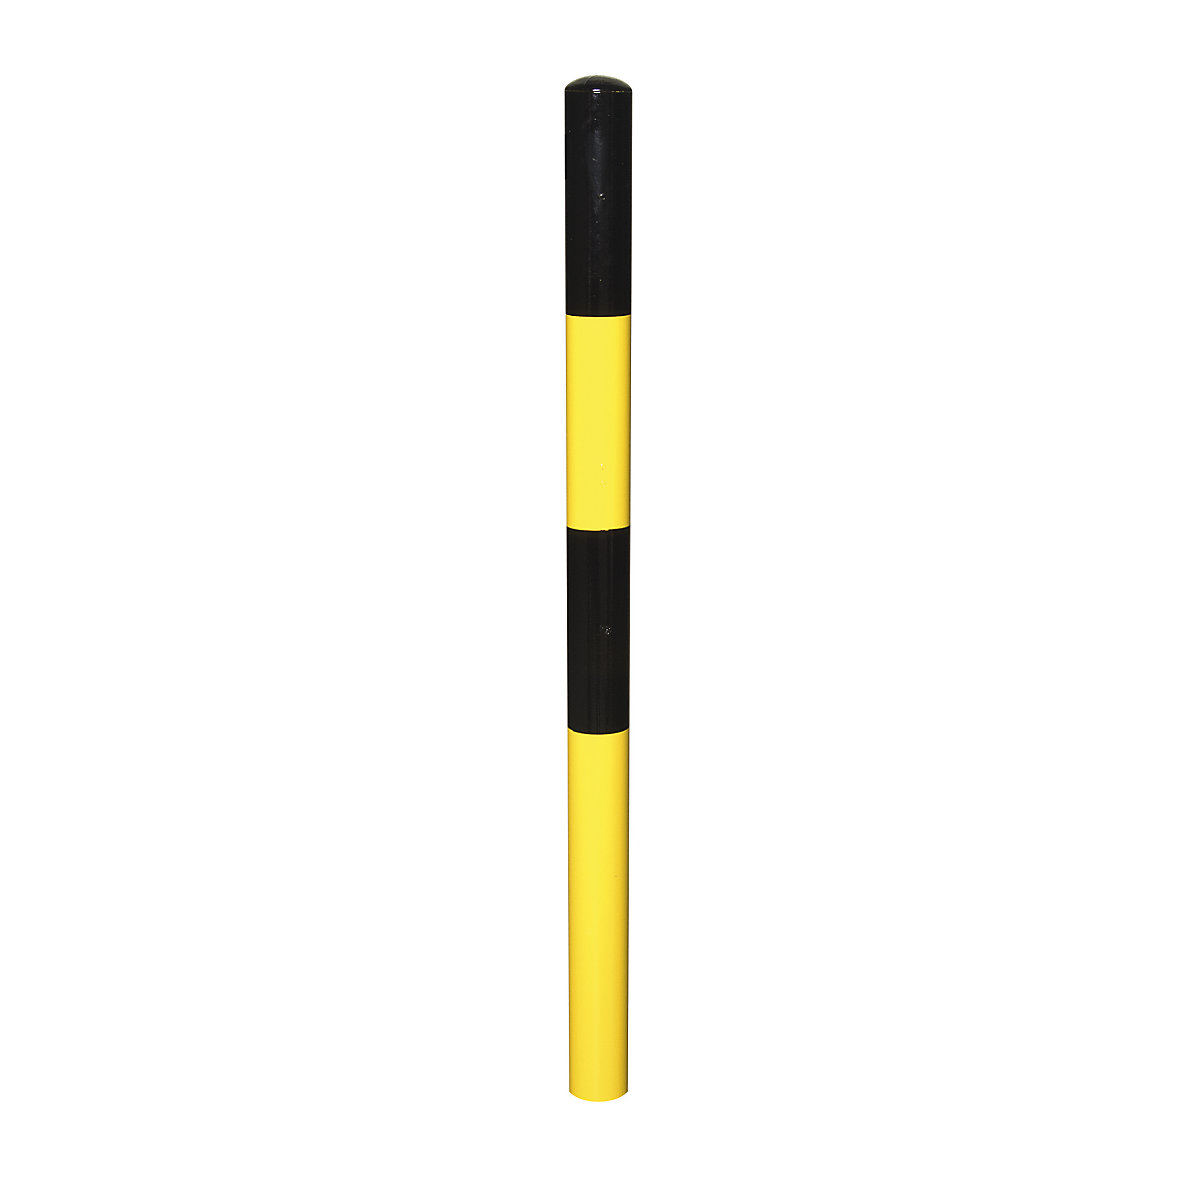 Barrier post, for setting in concrete, Ø 60 mm, painted black/yellow, 2 eyelets-8